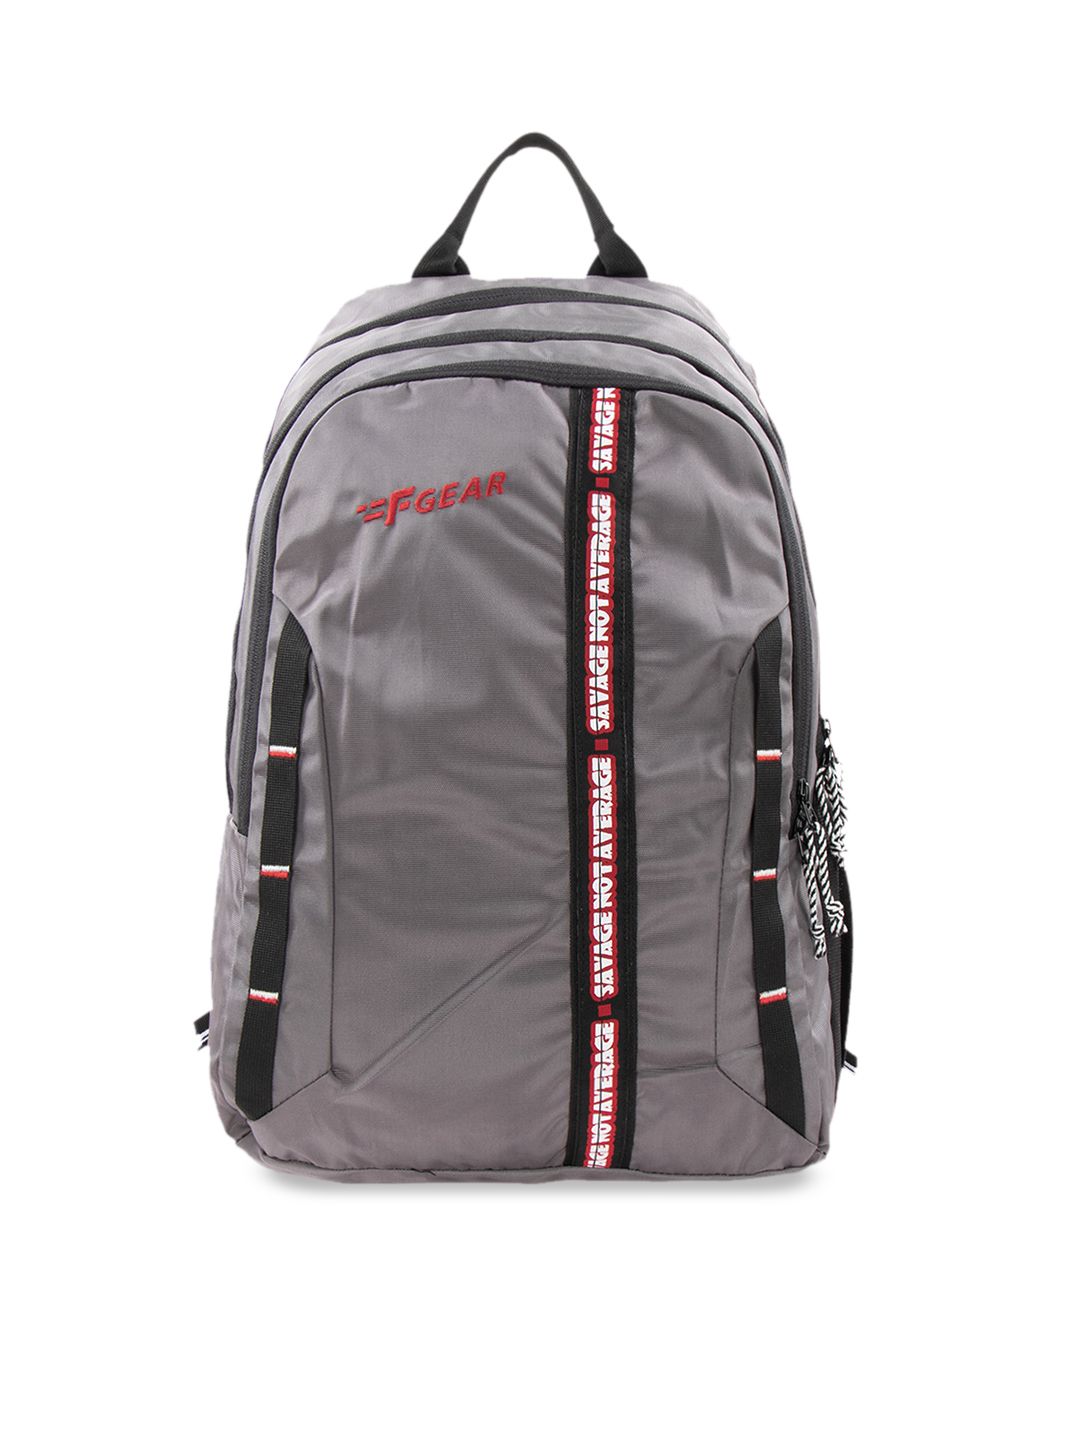 F Gear Unisex Grey Solid Backpack With Contrast Detail Price in India